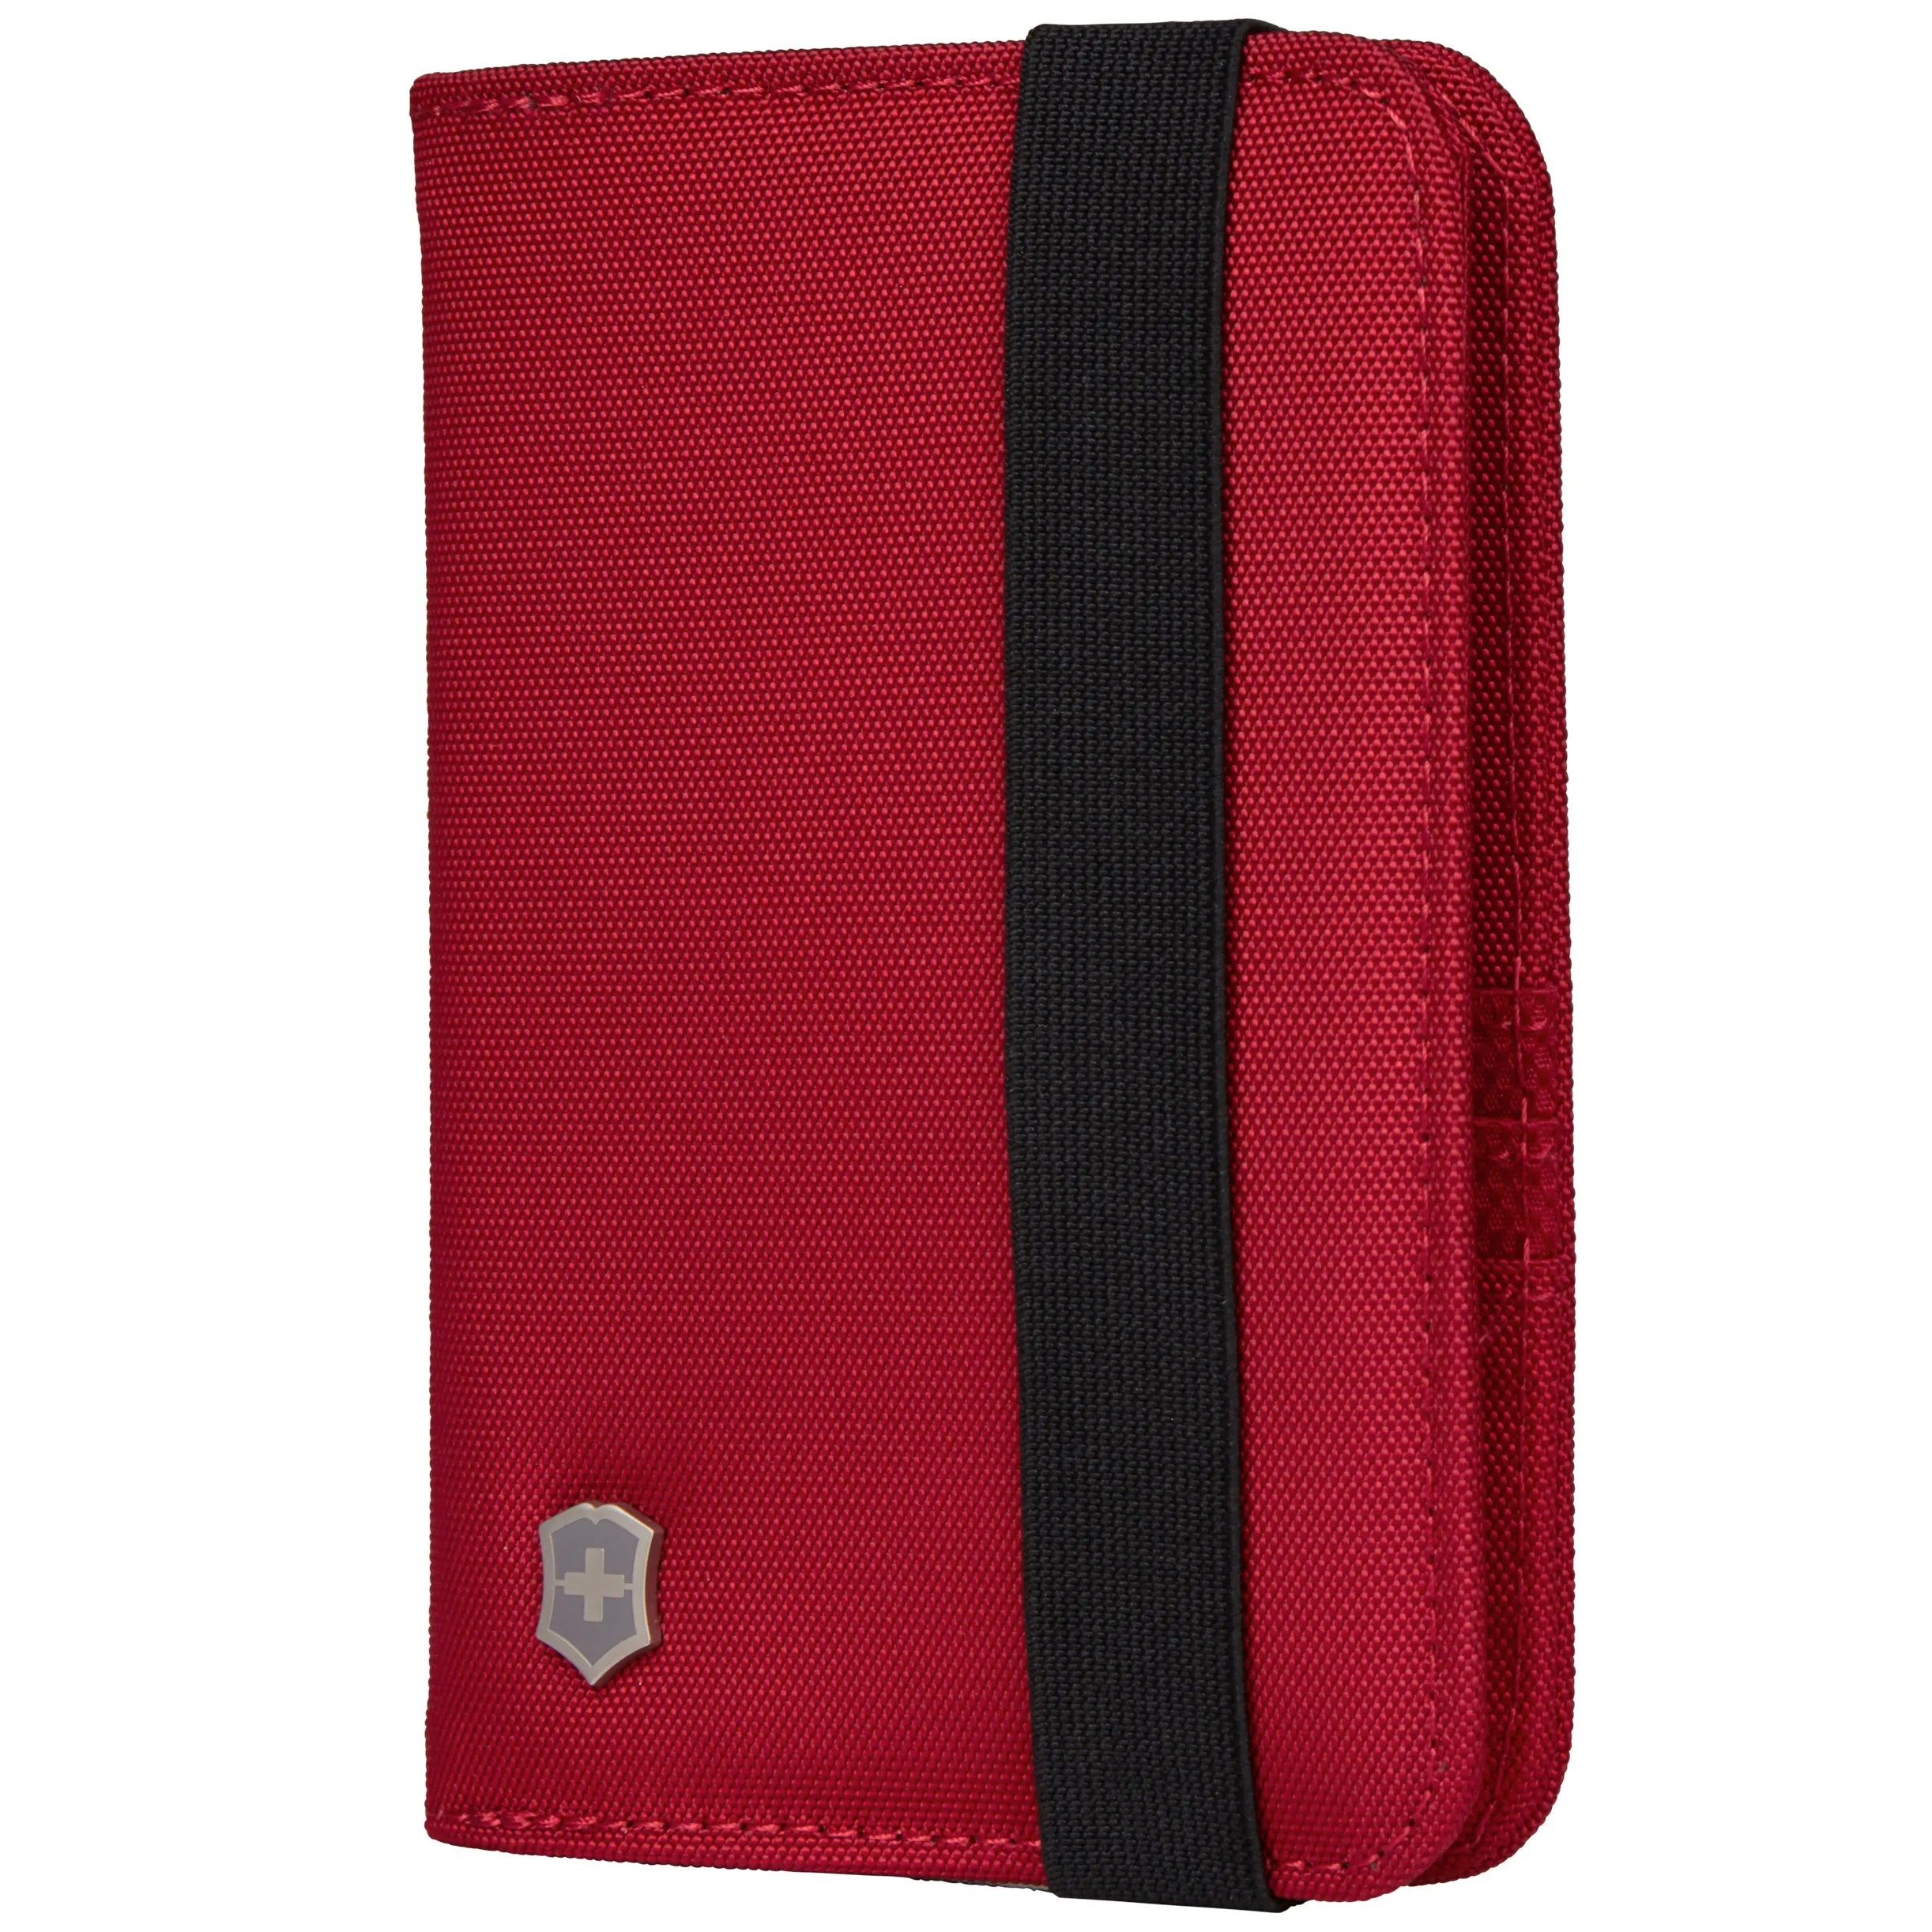 Victorinox Travel Accessories 5.0 ID card holder with RFID protection 14 cm - Red